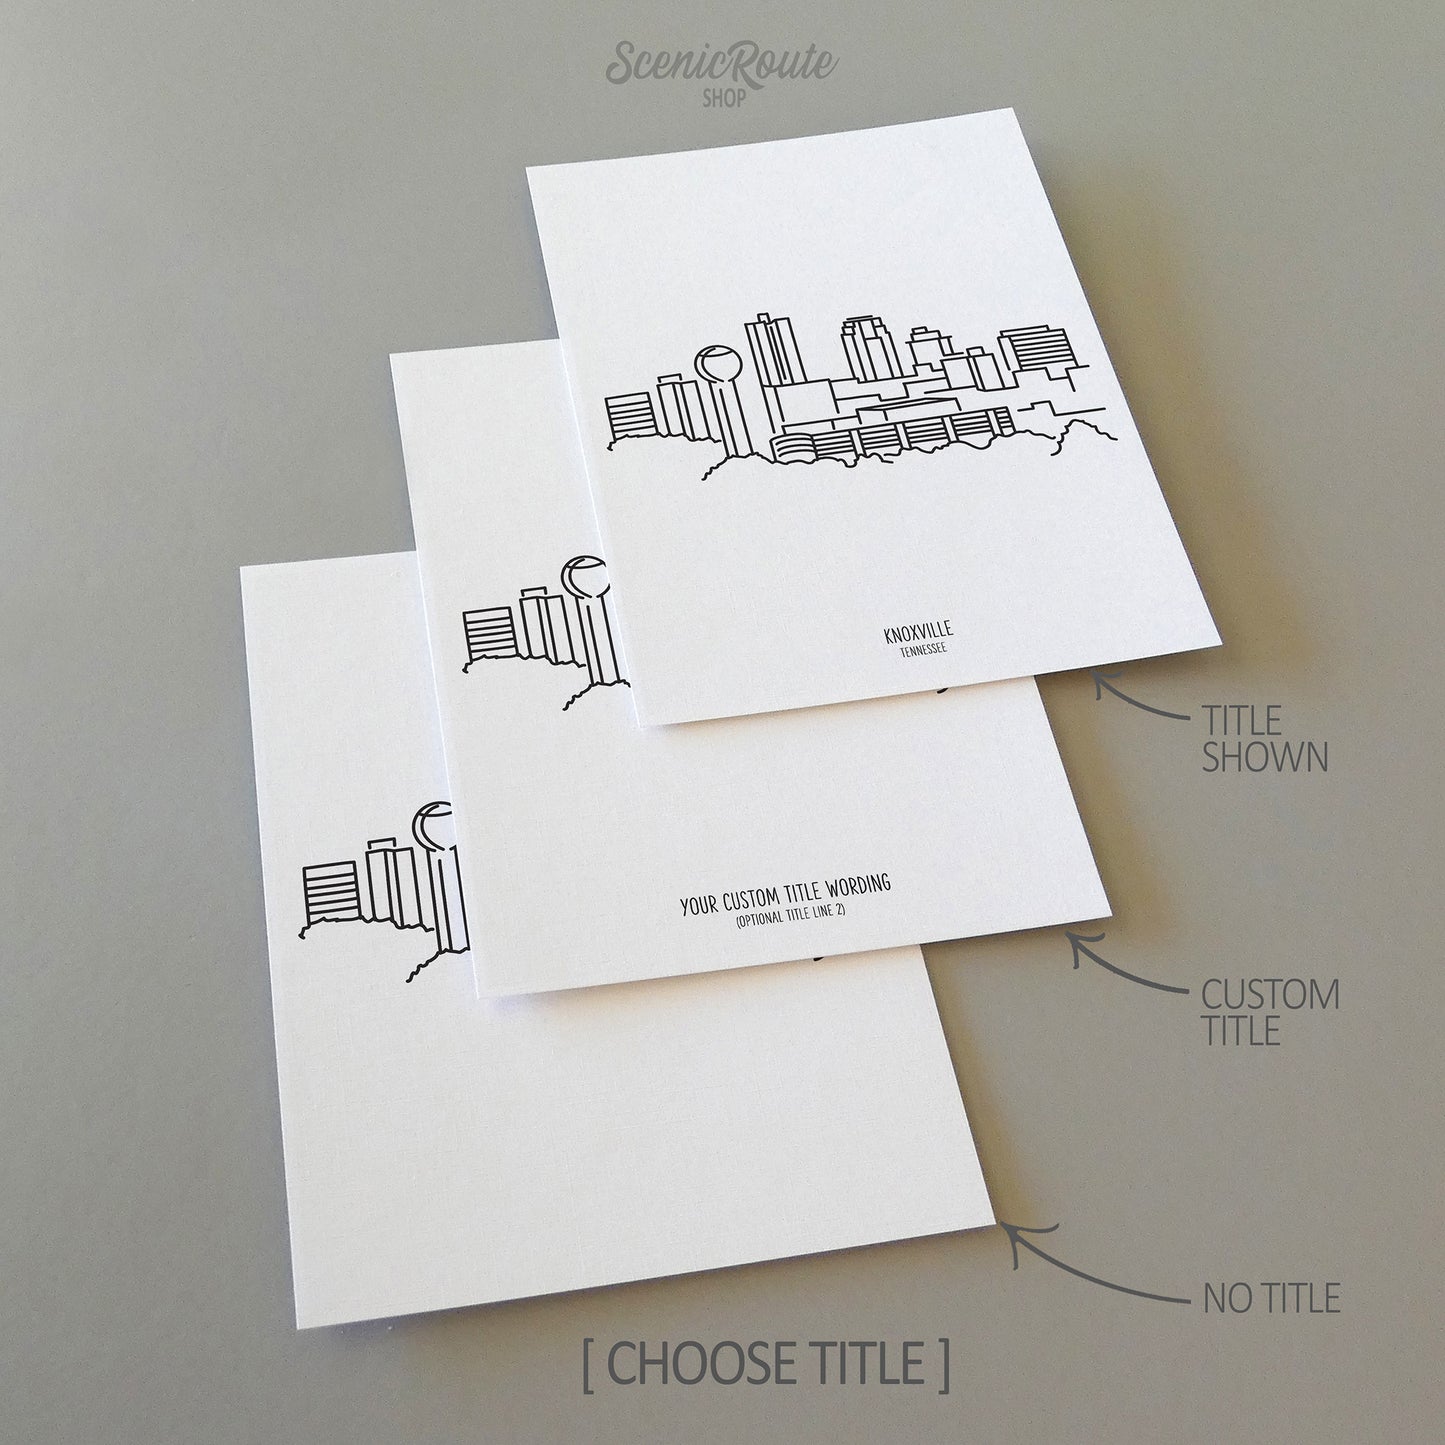 Three line art drawings of the Knoxville Tennessee Skyline on white linen paper with a gray background. The pieces are shown with title options that can be chosen and personalized.